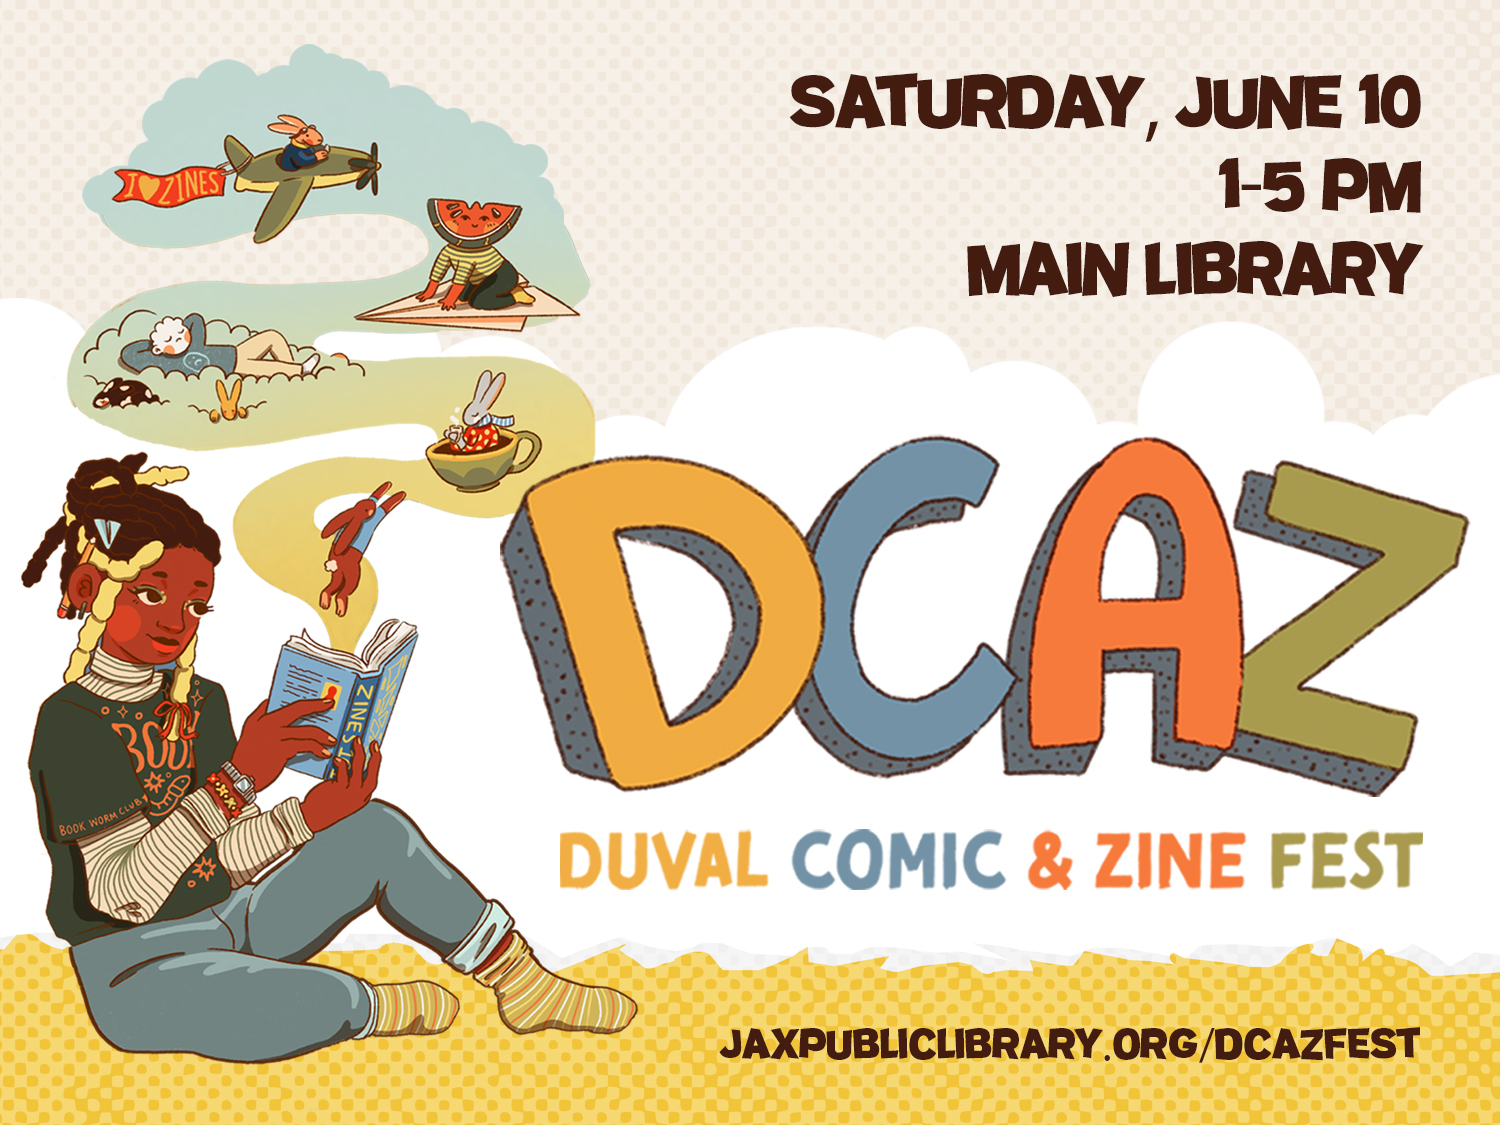 Duval Comic and Zine Fest Saturday, June 10 from 1-5 p.m. at the Main Library